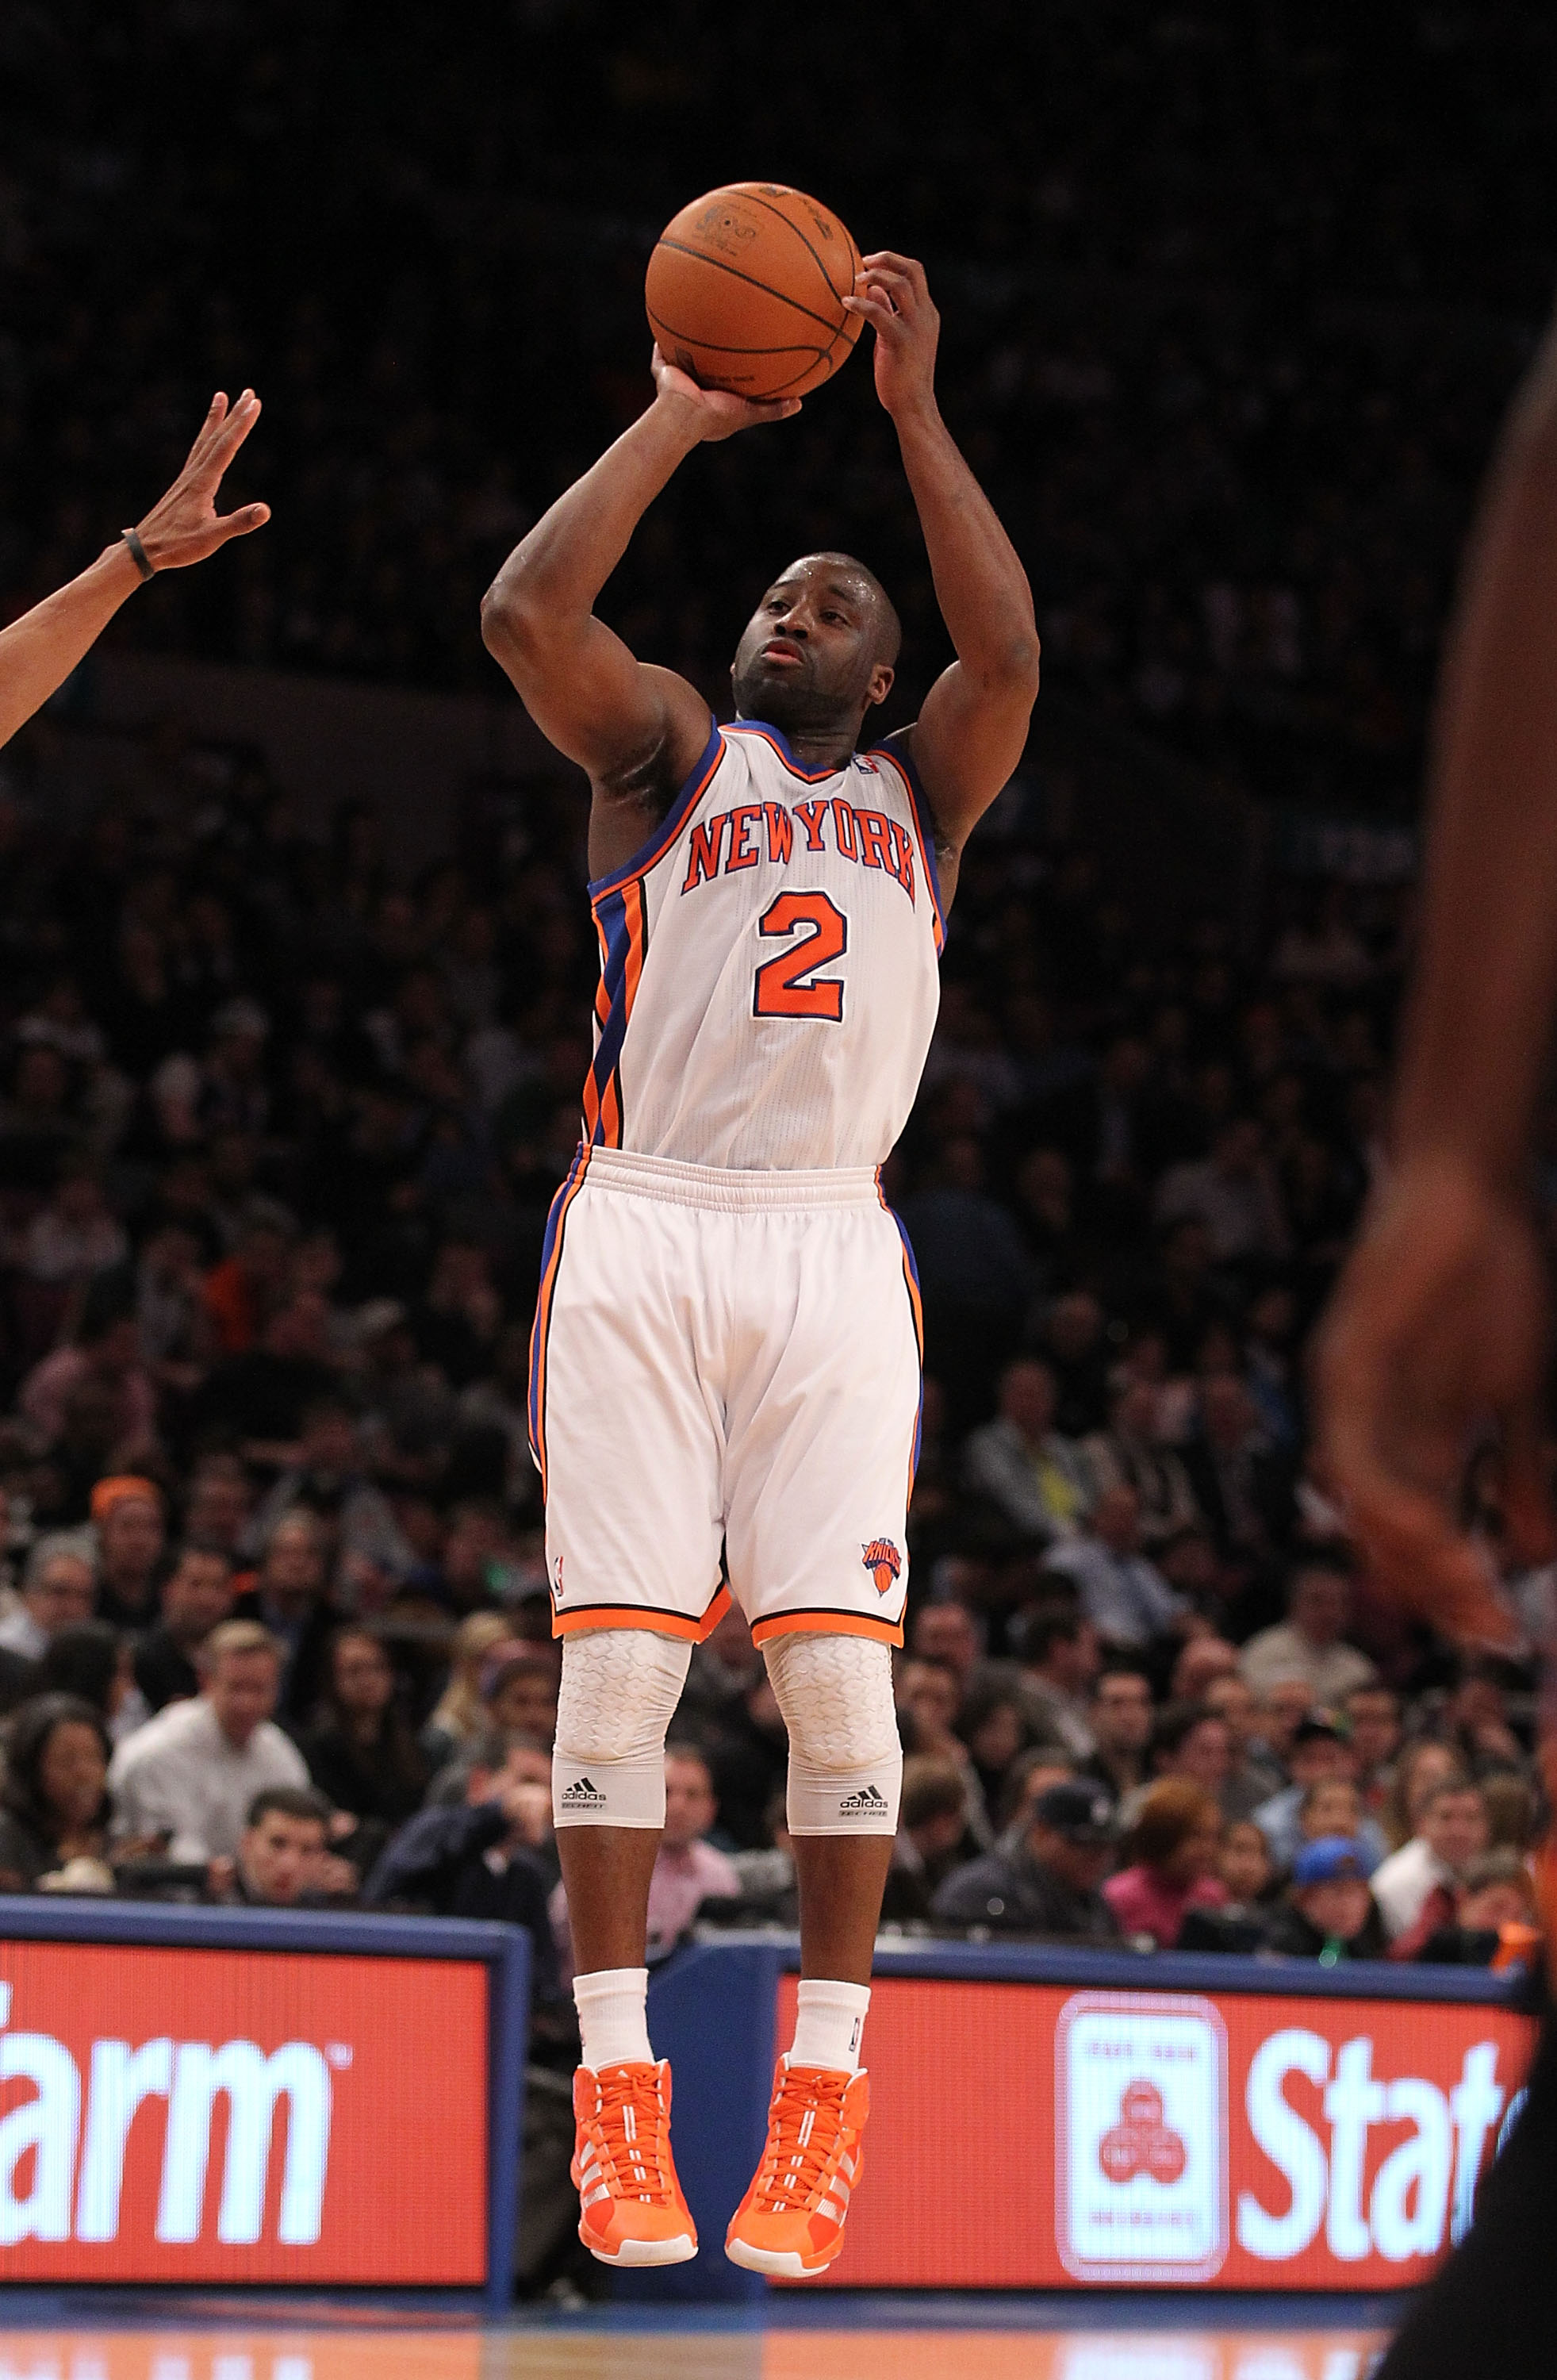 NEW YORK - DECEMBER 22:  Raymond Felton #2 of the New York Knicks in action against the Oklahoma City Thunder at Madison Square Garden on December 22, 2010 in New York, New York.   NOTE TO USER: User expressly acknowledges and agrees that, by downloading